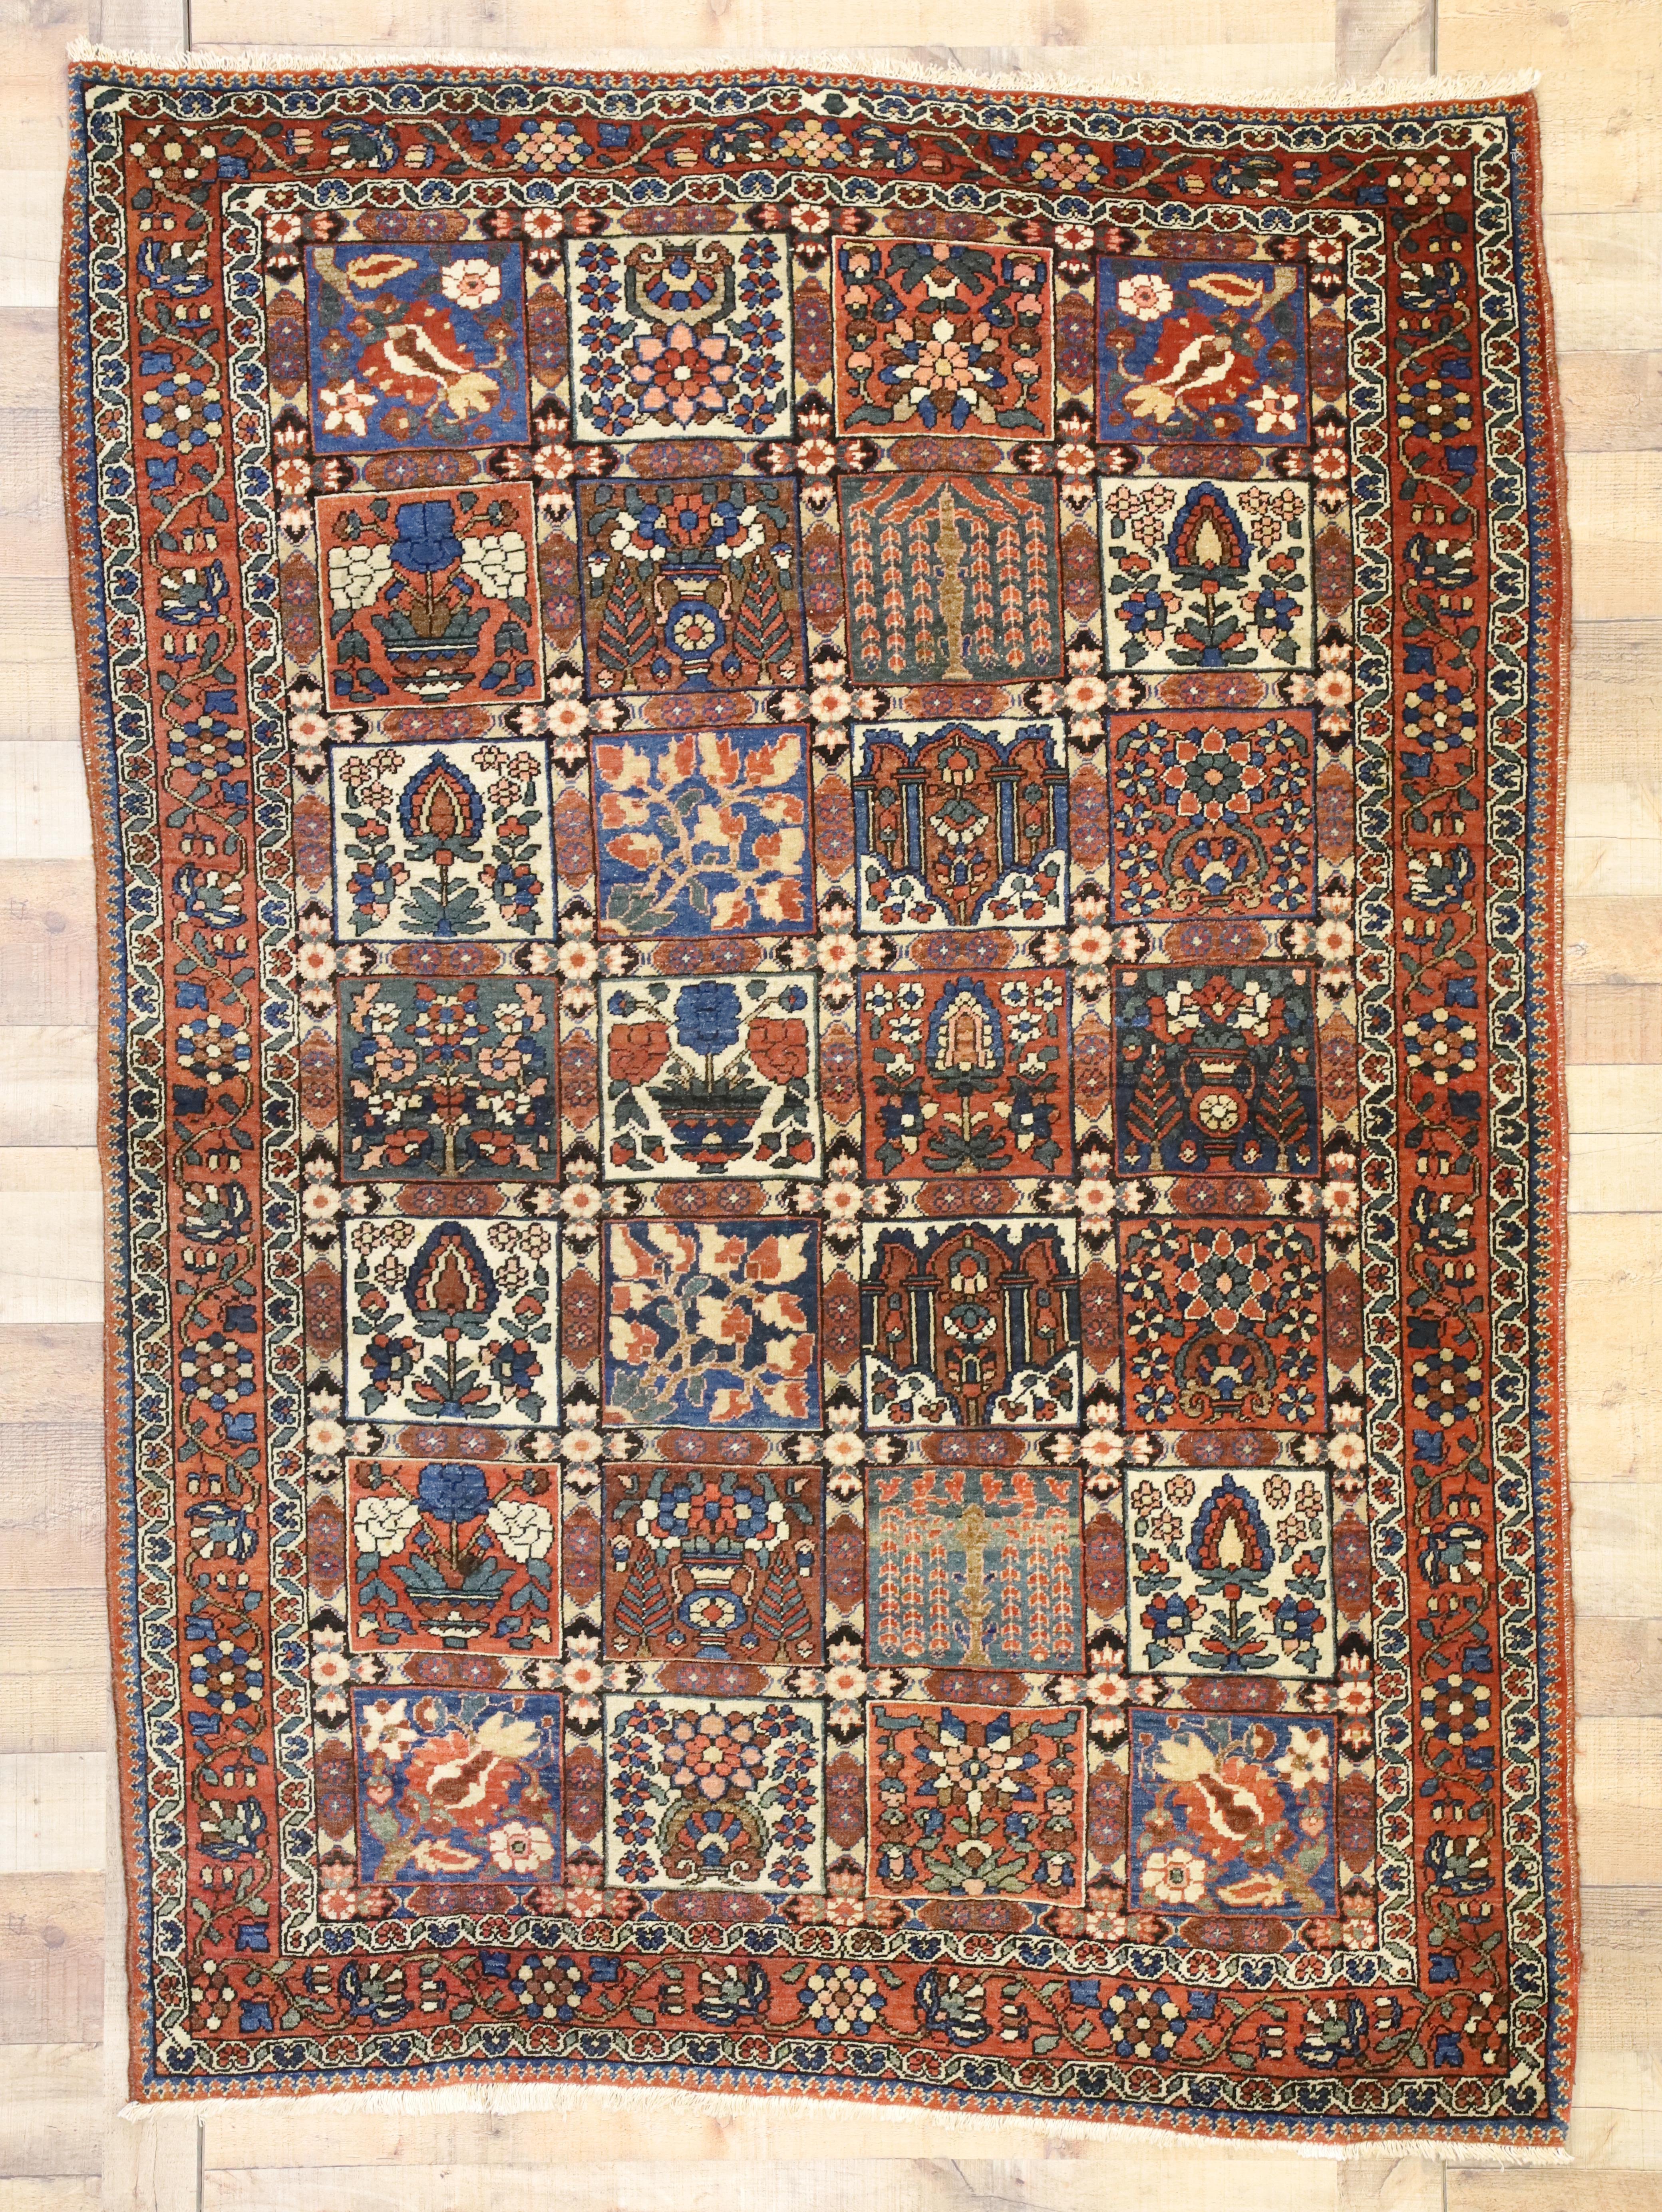 Rustic Style Antique Persian Bakhtiari Rug with Four Seasons Garden Design For Sale 2